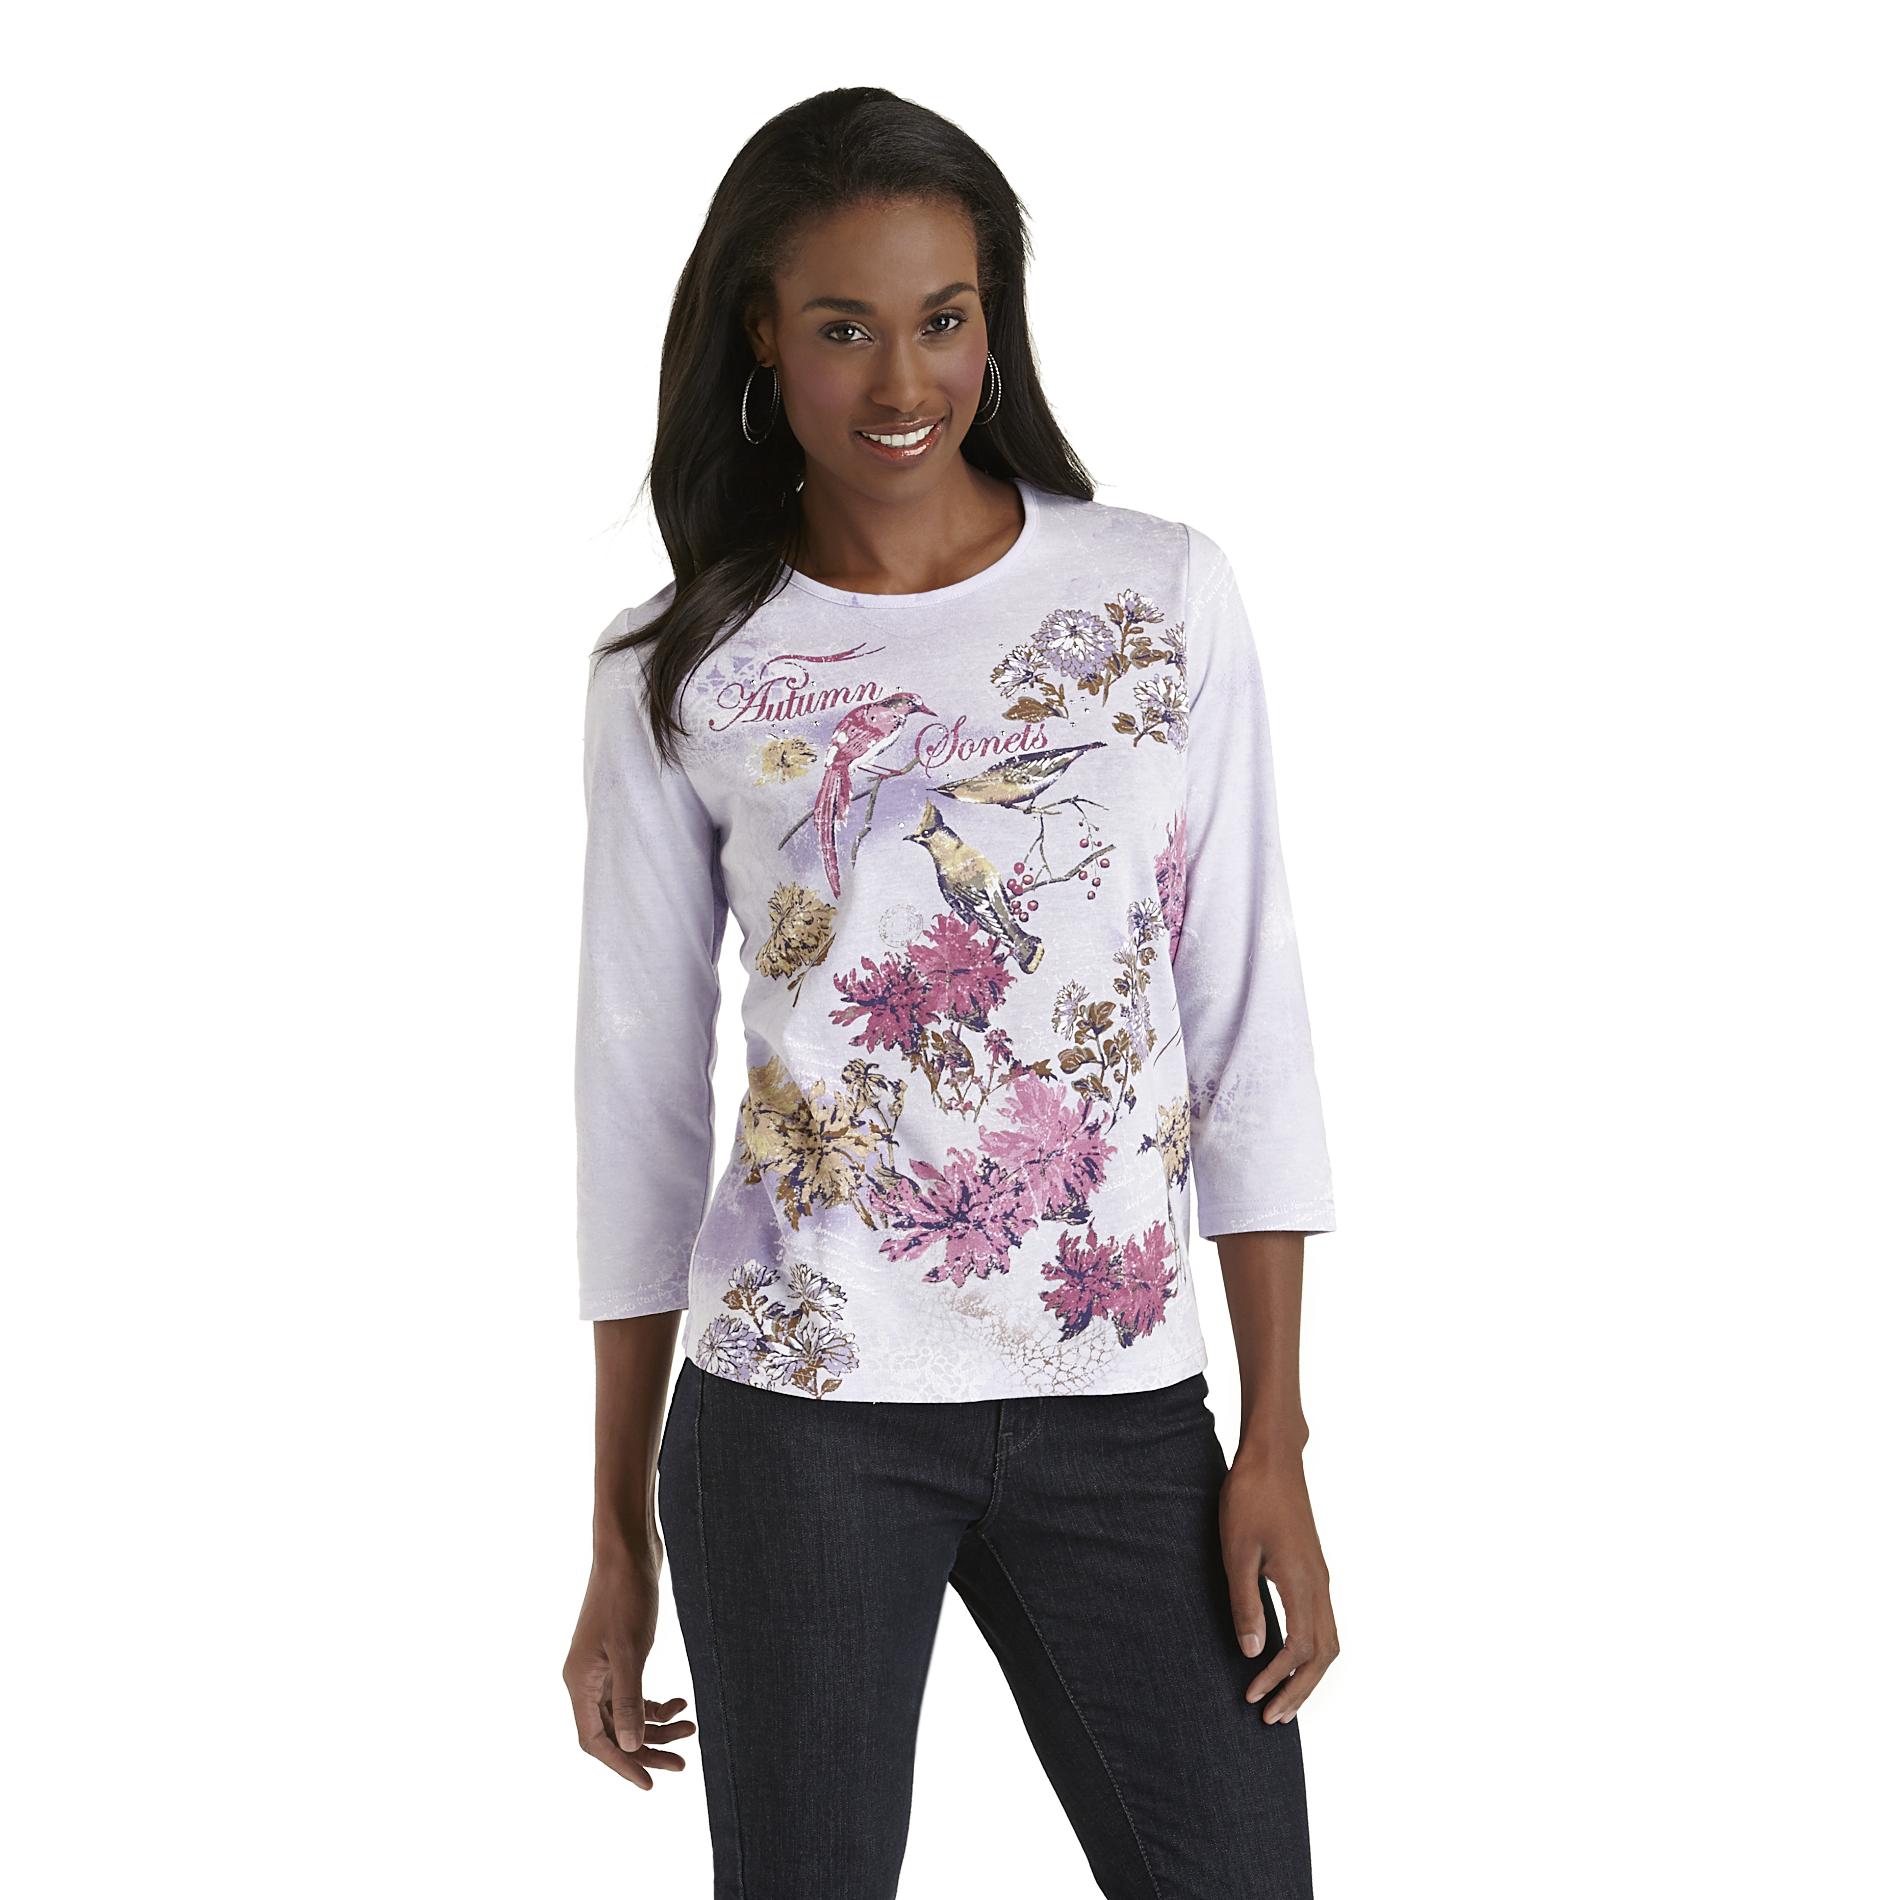 Basic Editions Women's Long-Sleeve Graphic T-Shirt - Floral/Birds